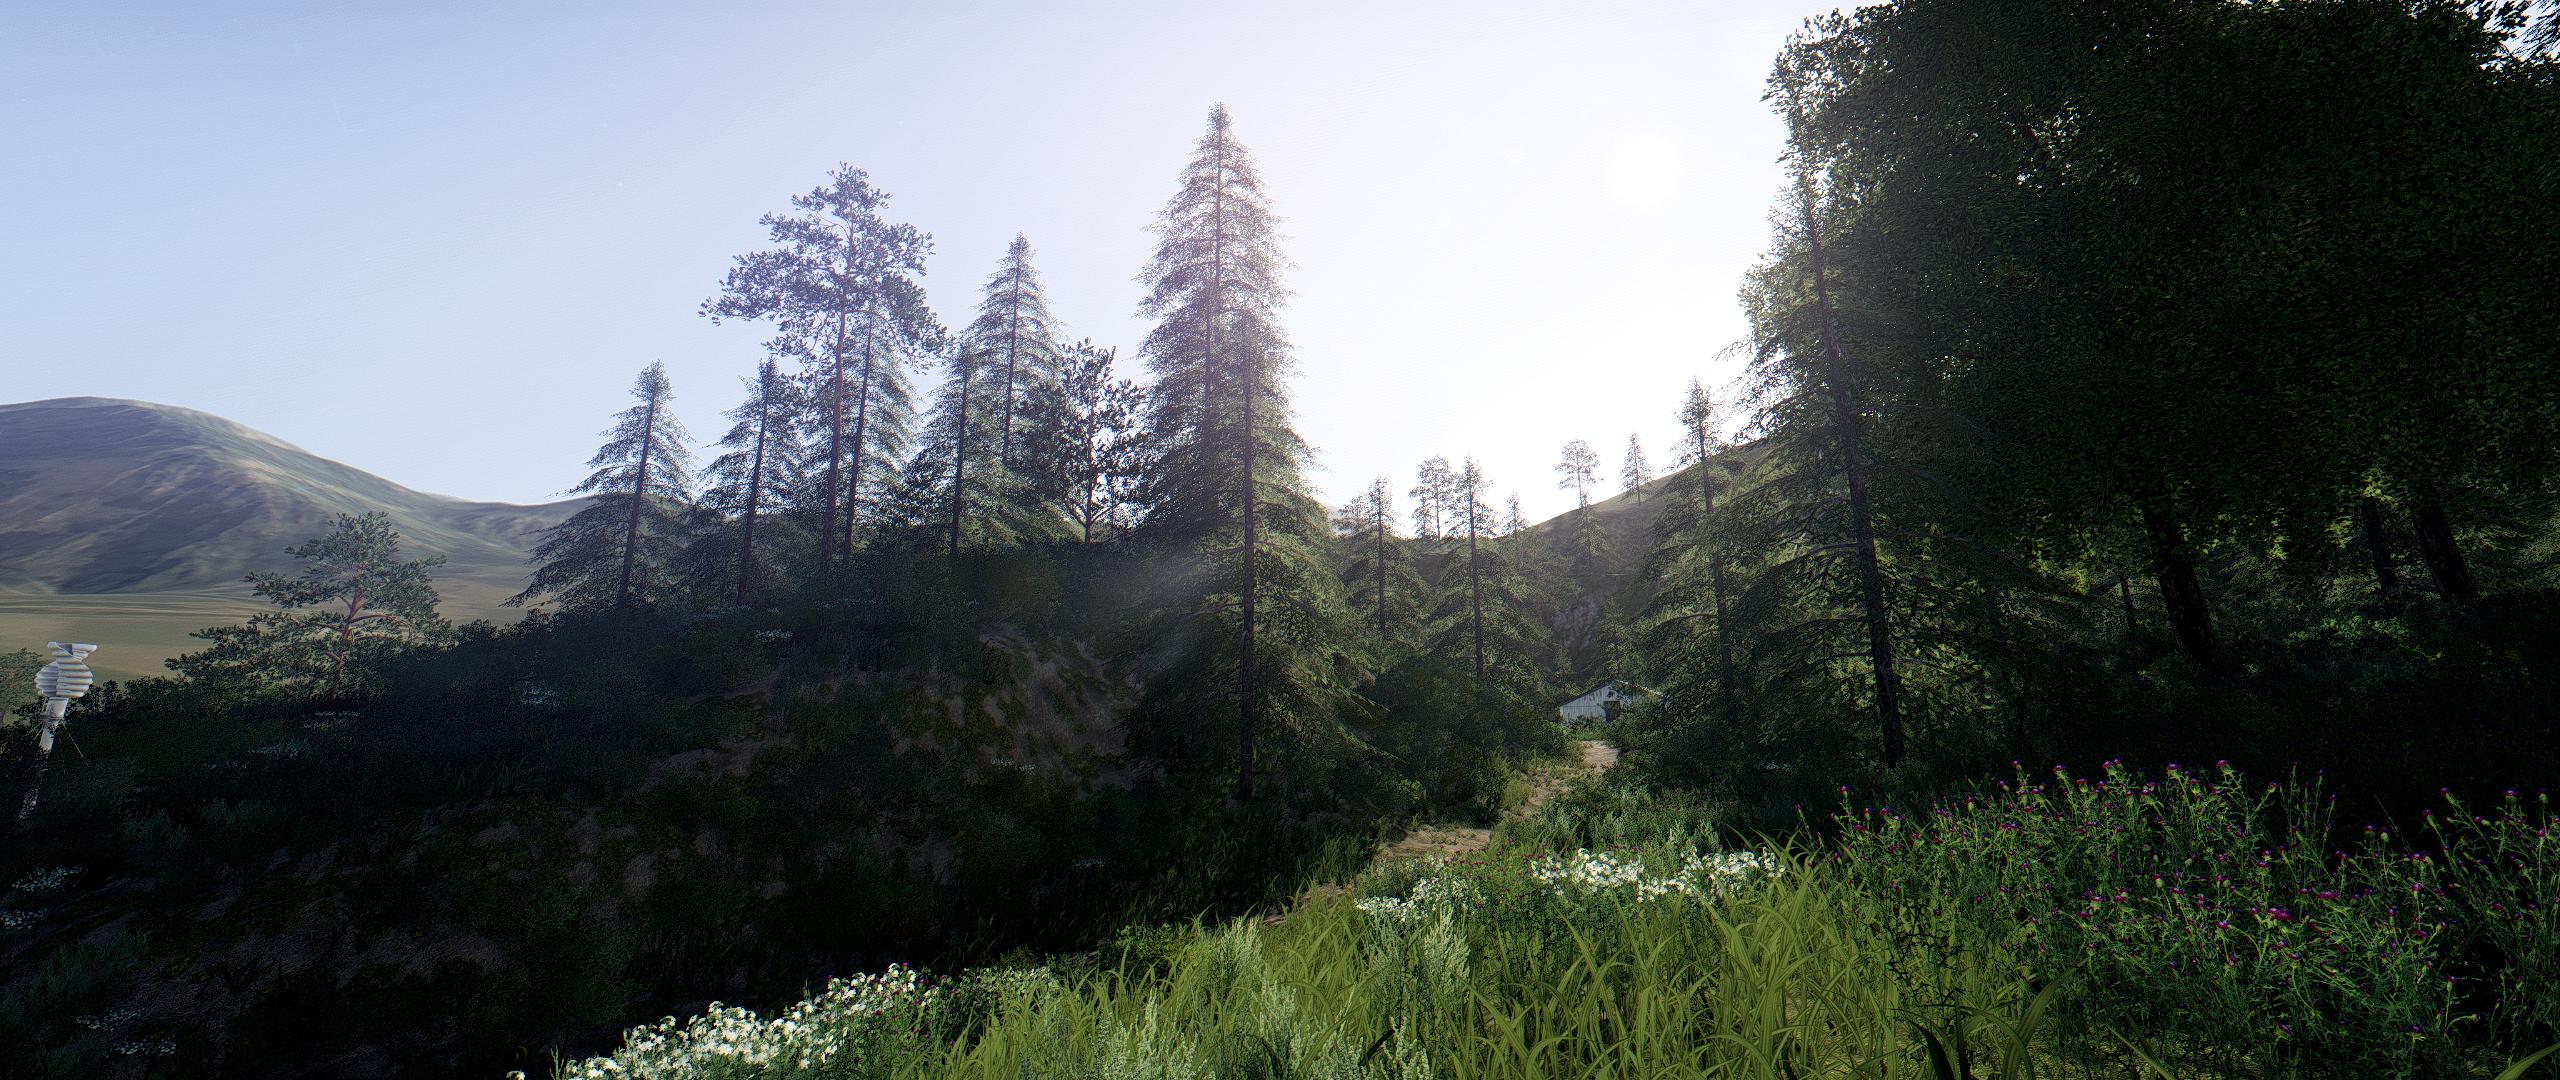 Reshade v 4.0.2 Better Colors & Realism by animatiV